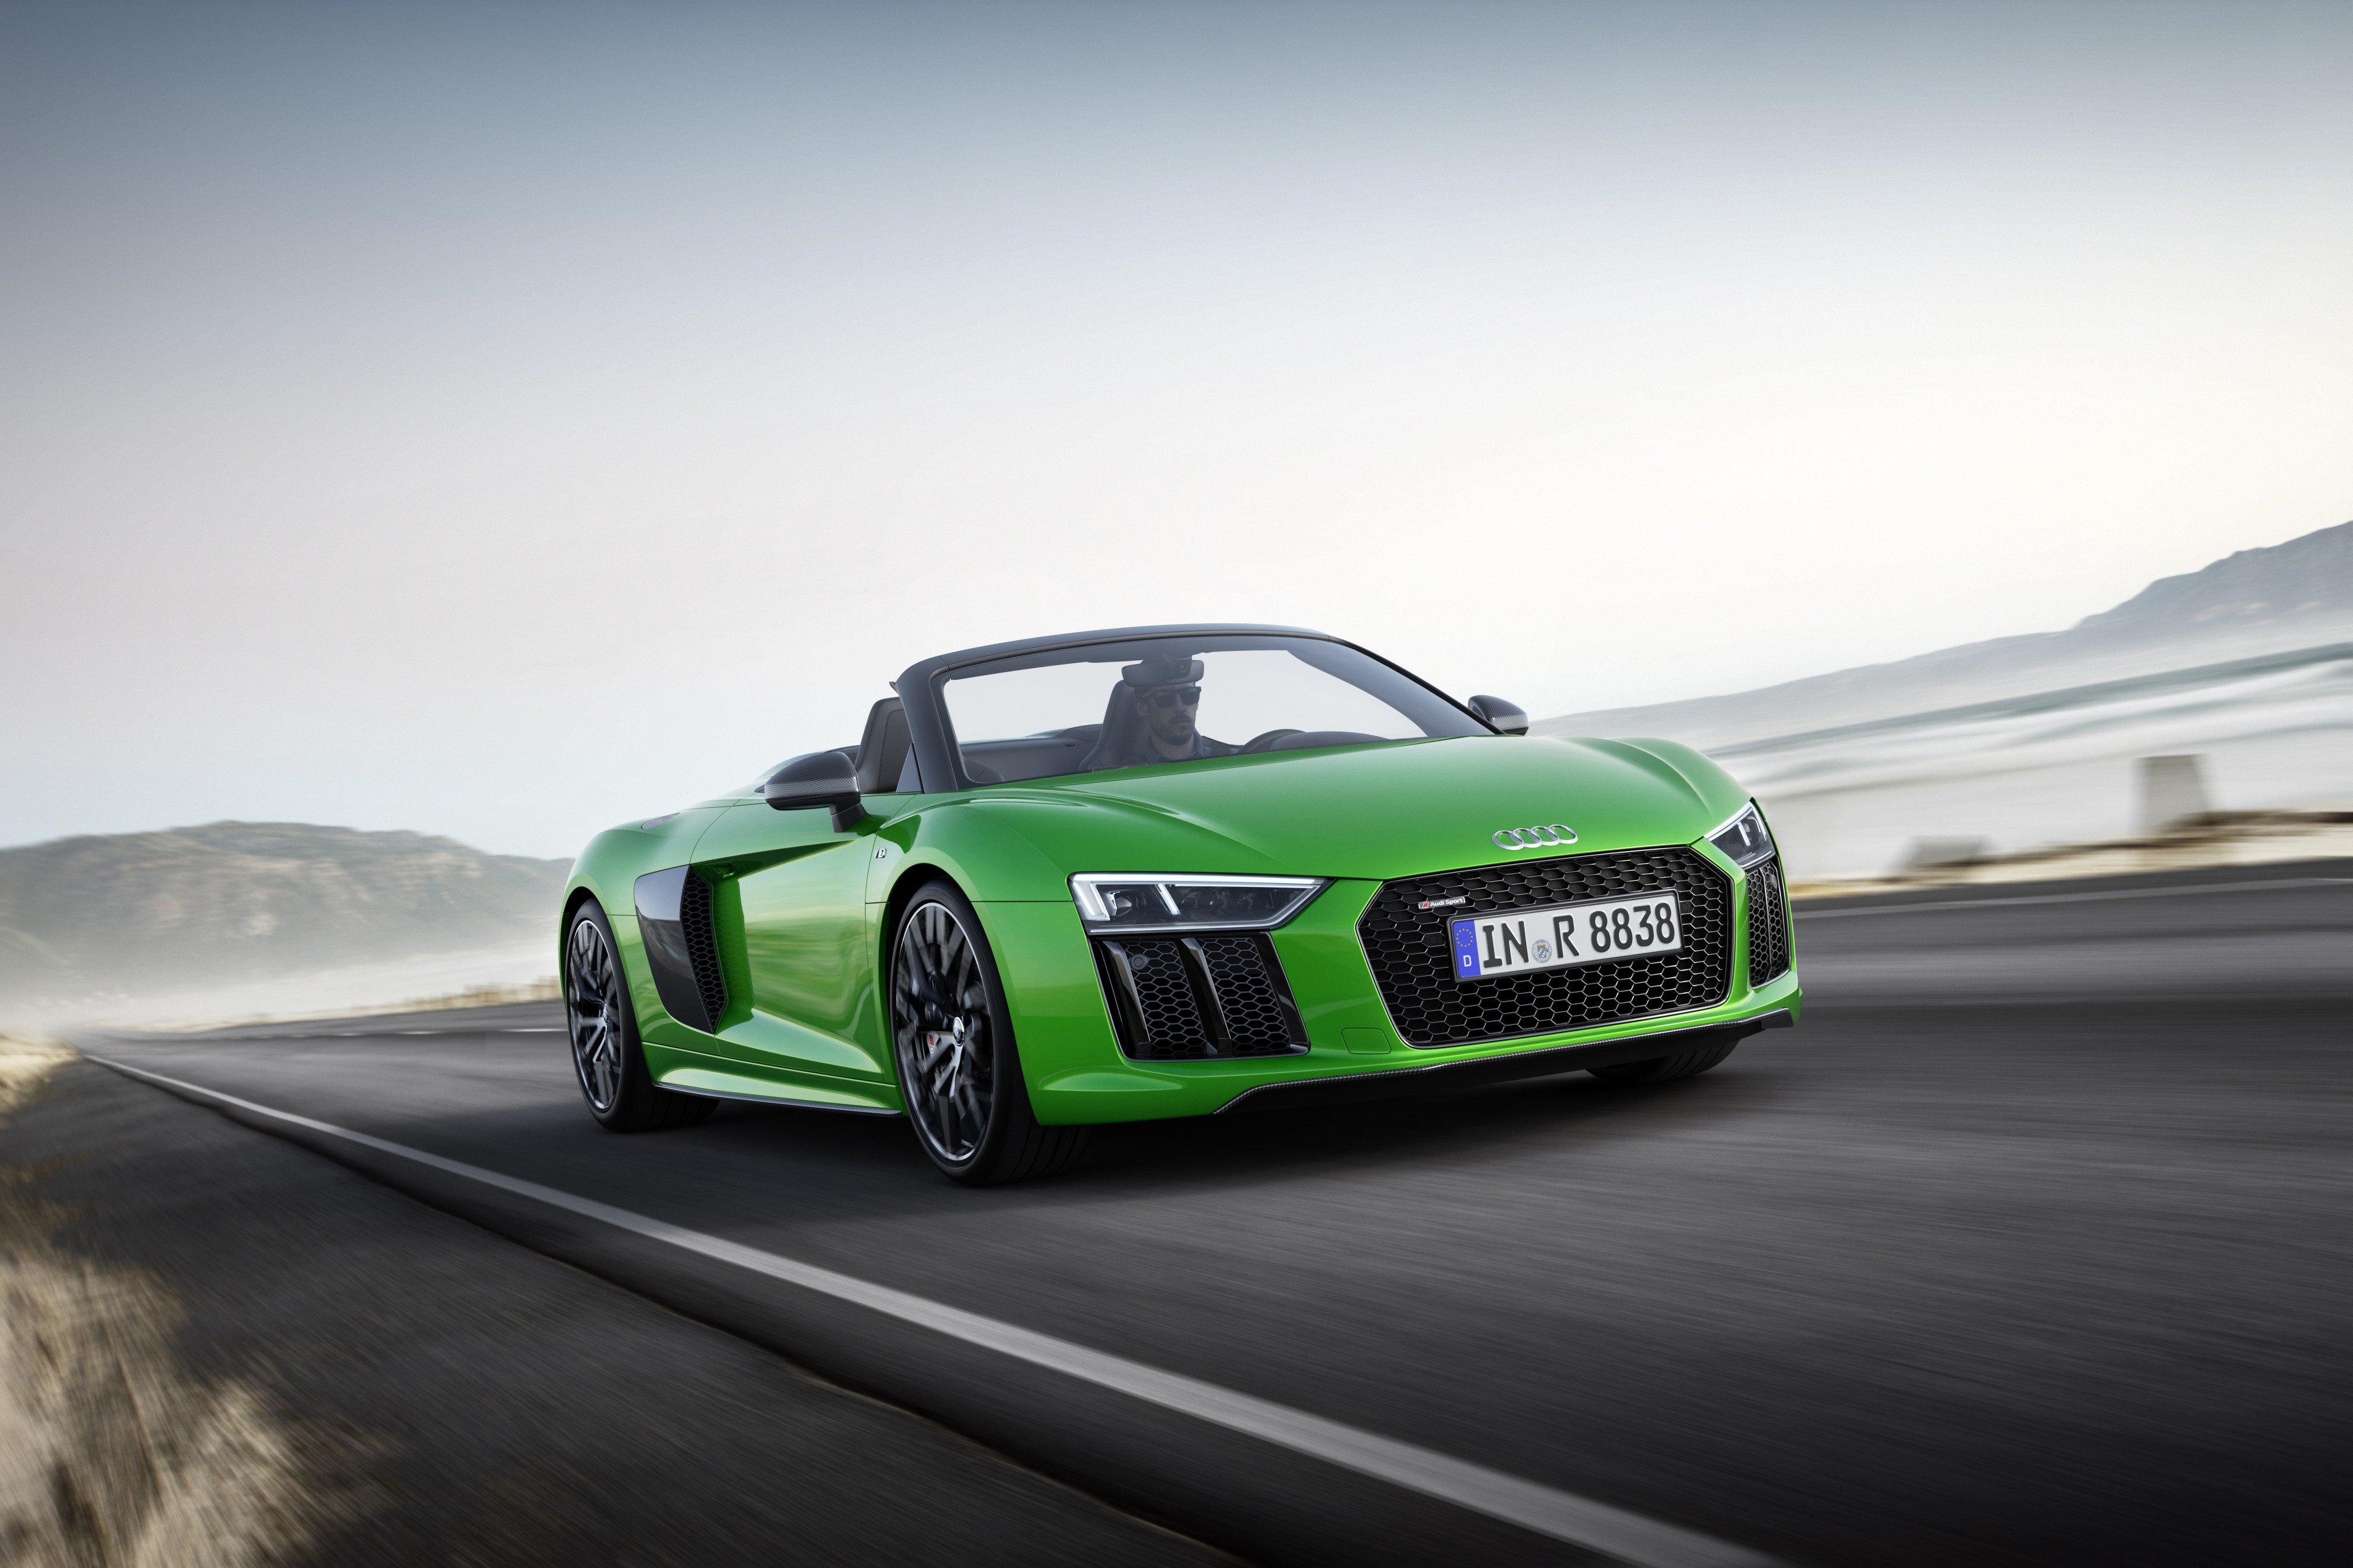 Audi’s R8 Spyder V10 plus, seen in micrommat green, can accelerate to 100km/h in about 3.3 seconds and has a top speed of 336km/h. Photo: Handout